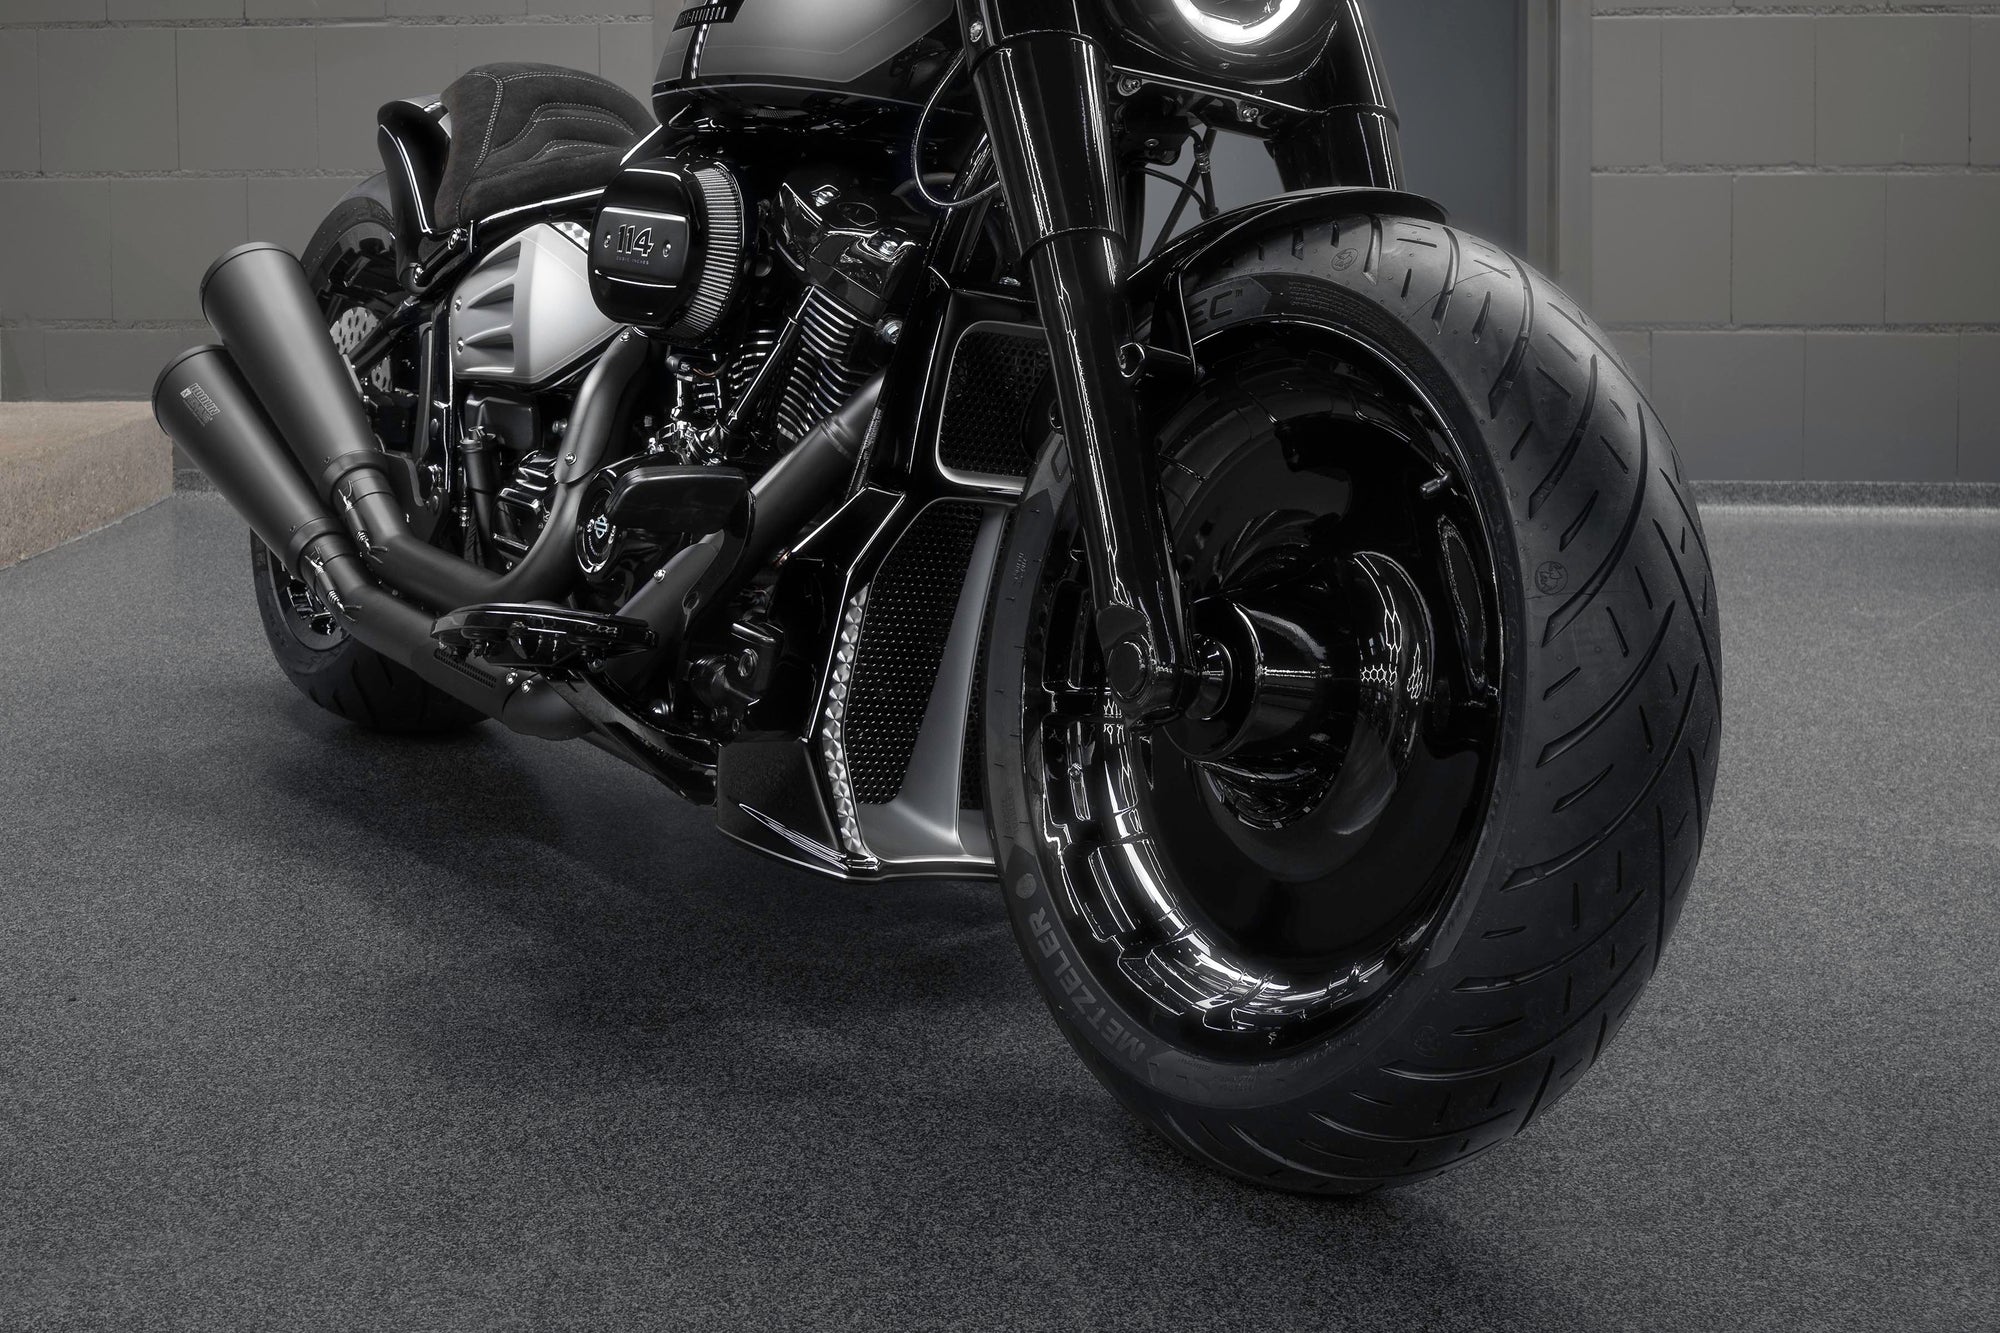 Zoomed Harley Davidson Softail Fat Boy motorcycle with Killer Custom parts from the front in a modern bike shop